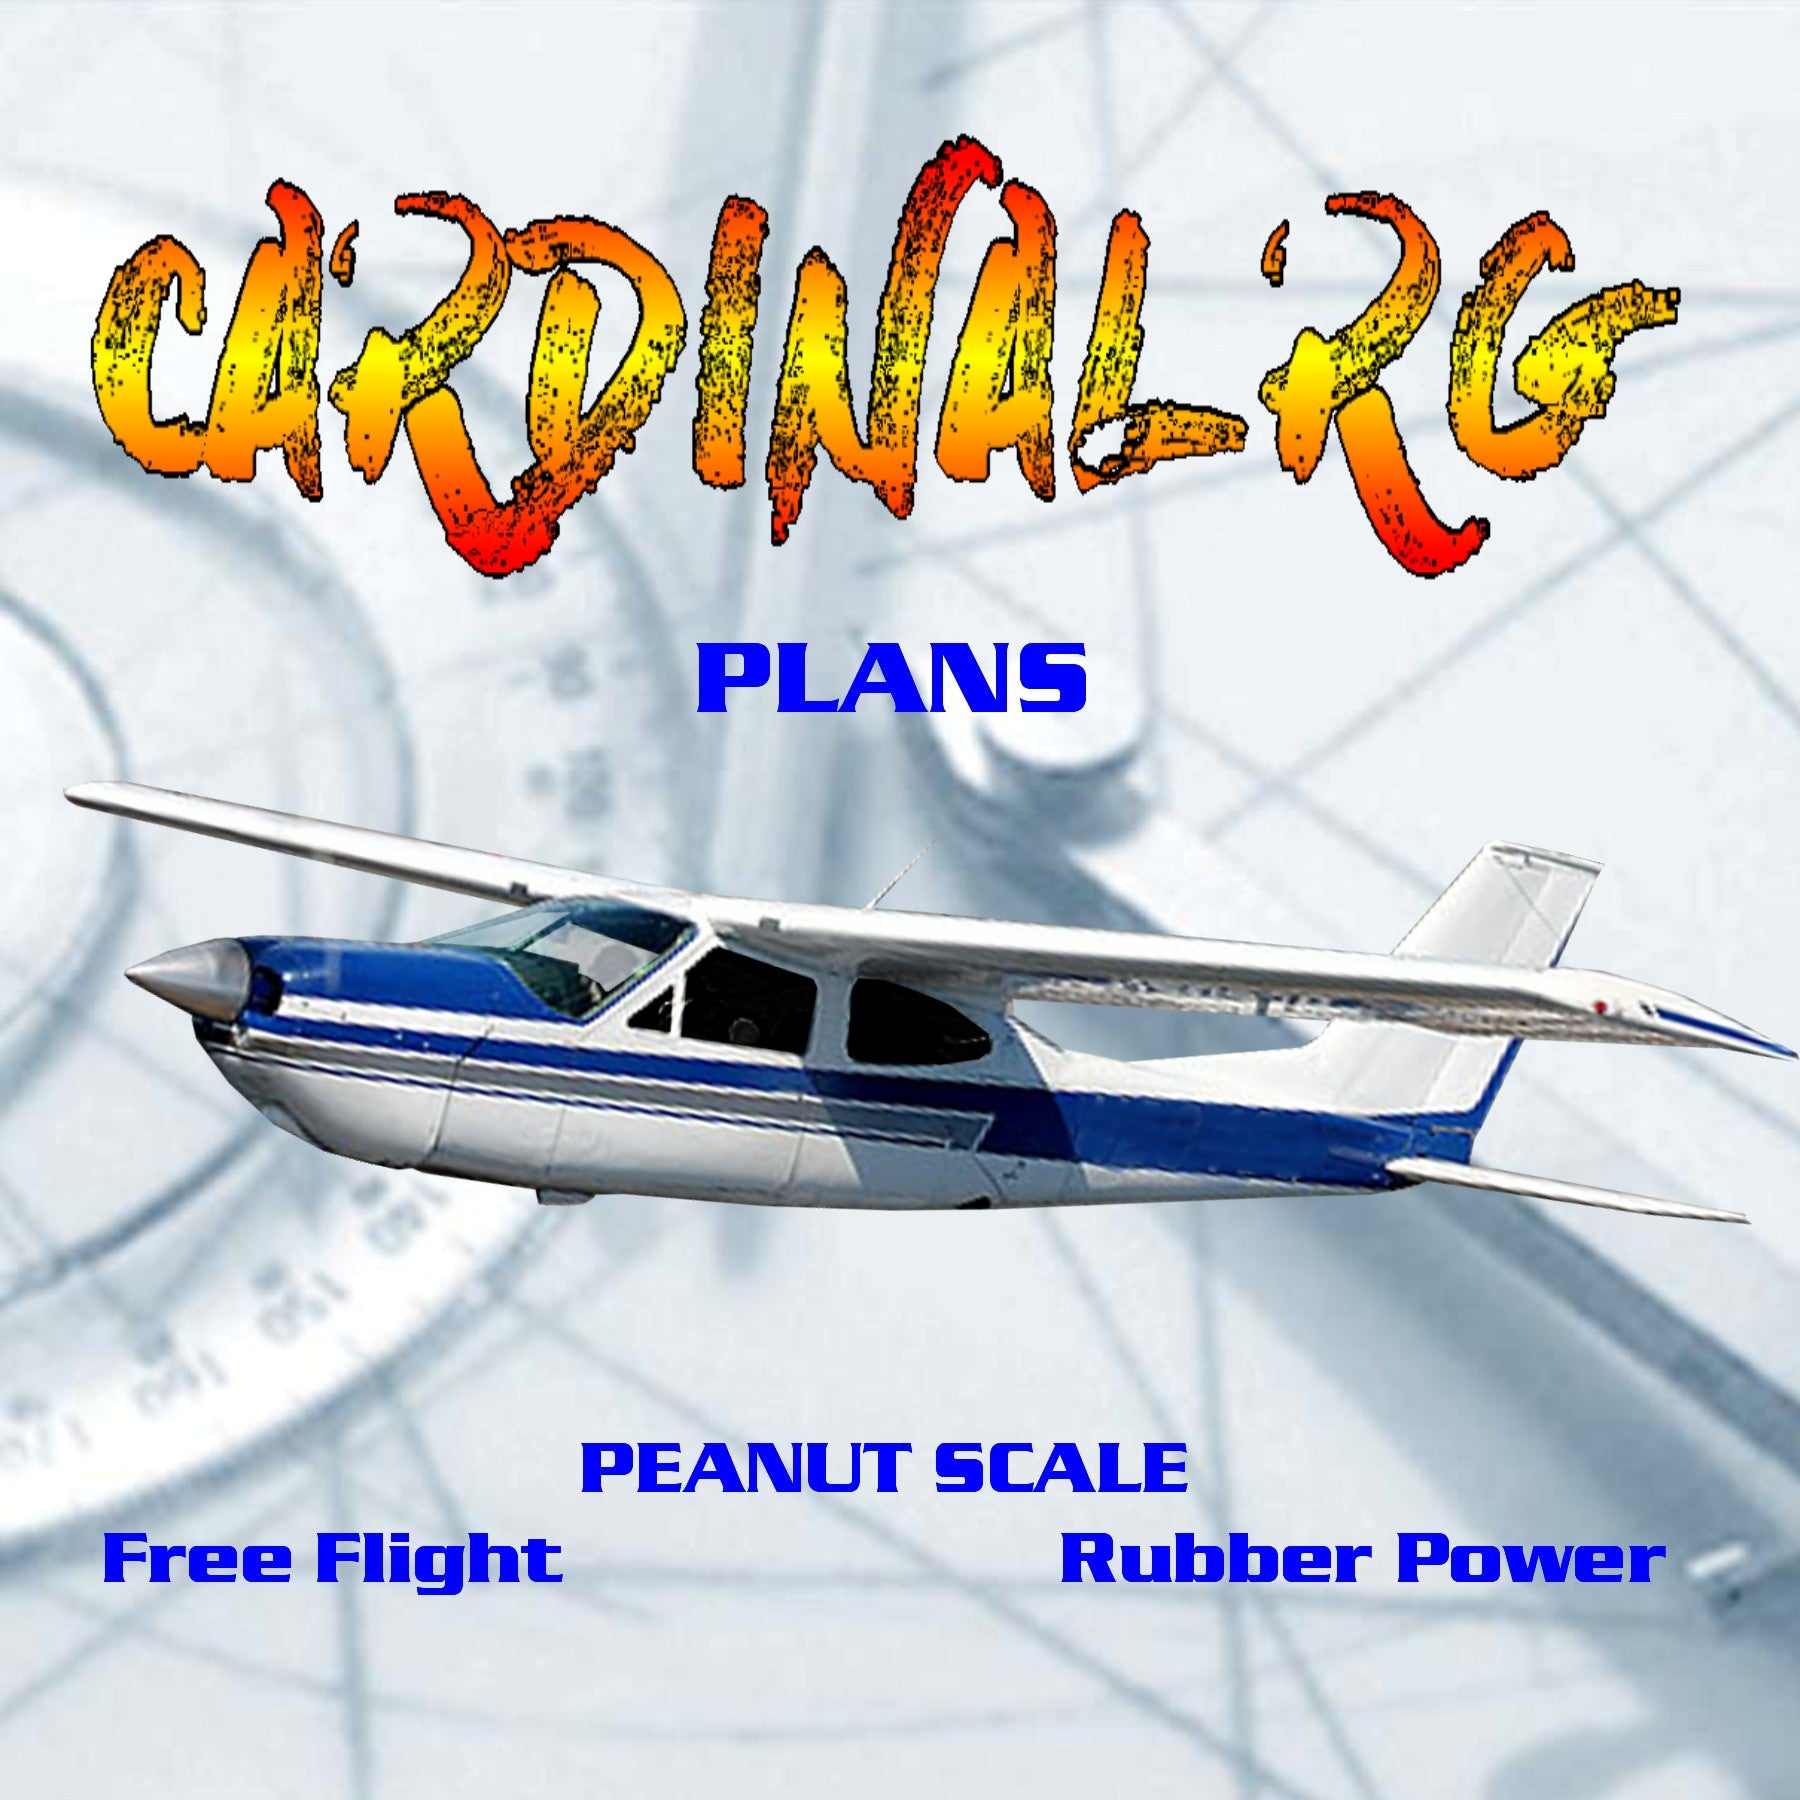 full size printed peanut scale plans cessna cardinal rg the model flew well, and was easy to trim